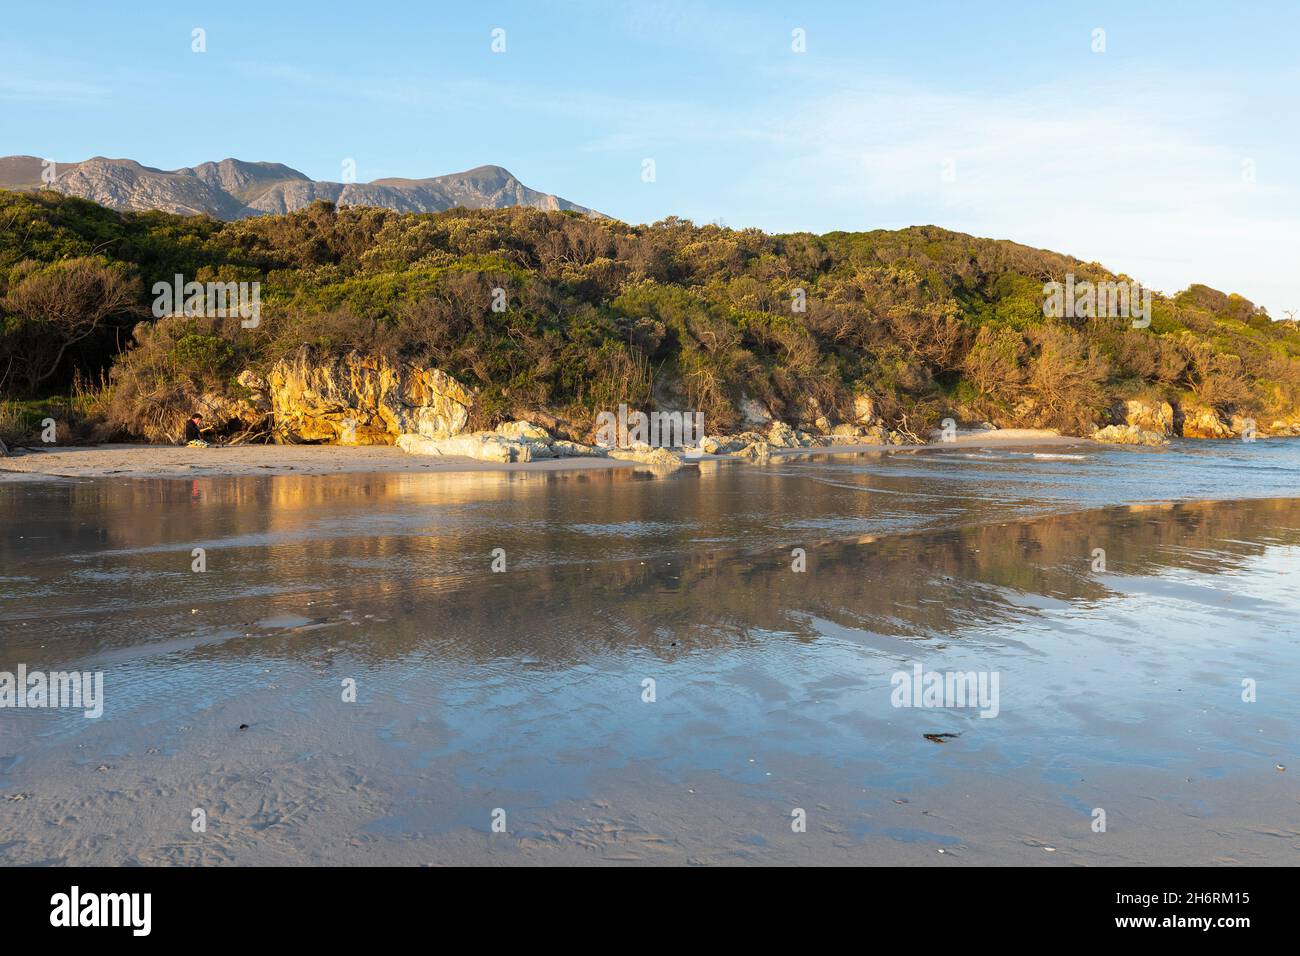 Woodland and mountains scenery, a small sheltered sandy beach on the Atlantic shore. Stock Photo